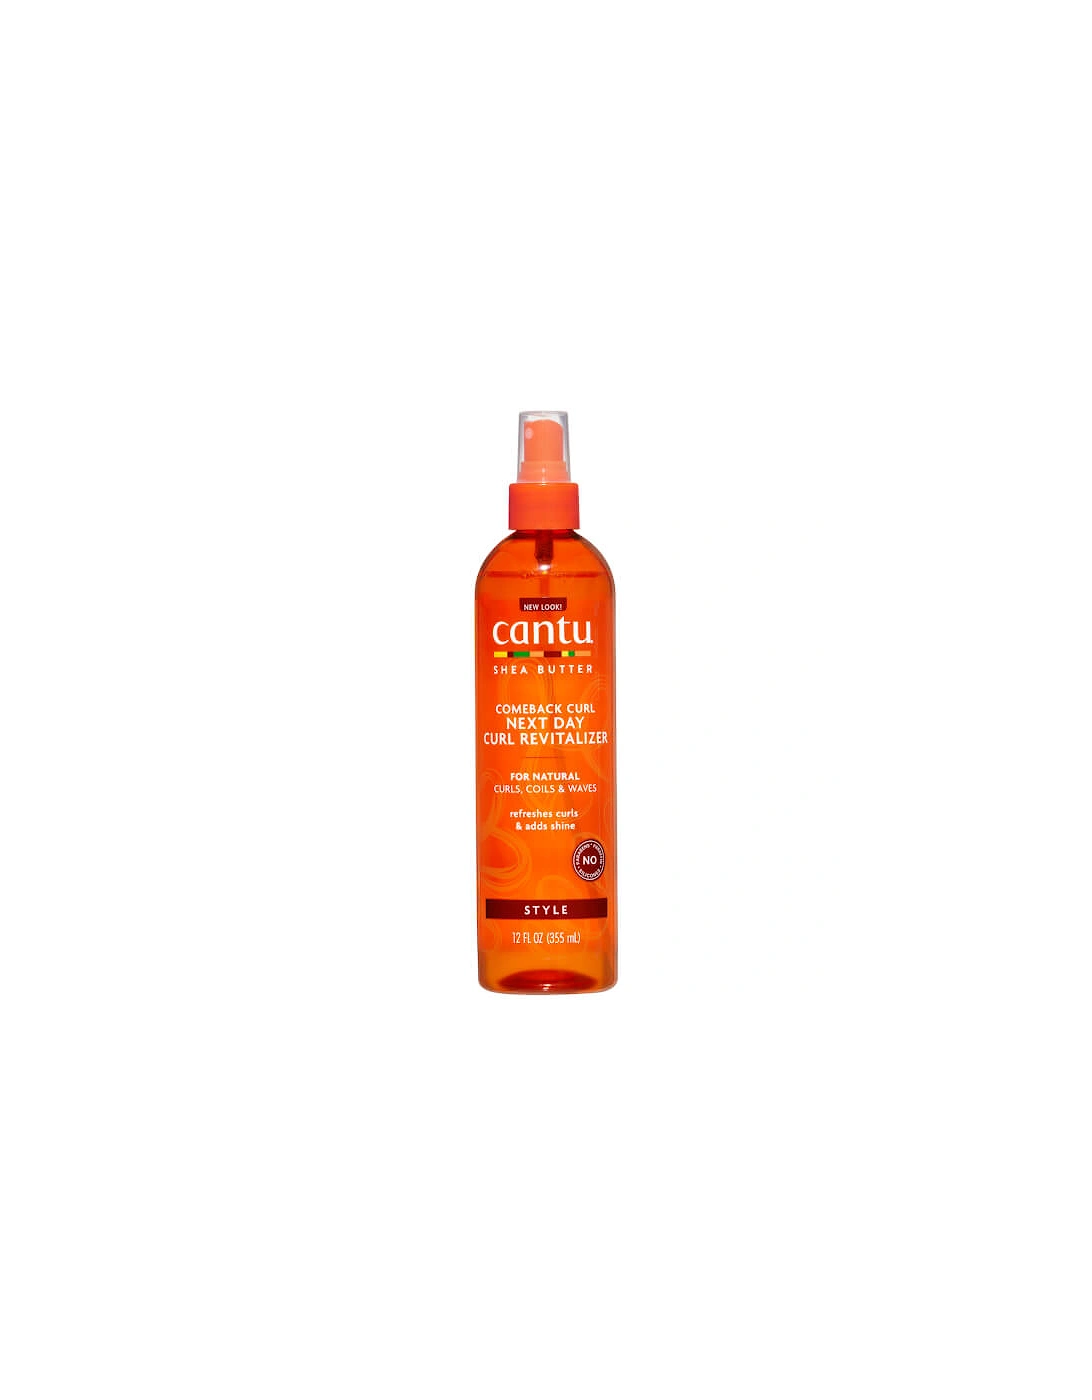 Shea Butter for Natural Hair Comeback Curl Next Day Curl Revitalizer 355ml - Cantu, 2 of 1